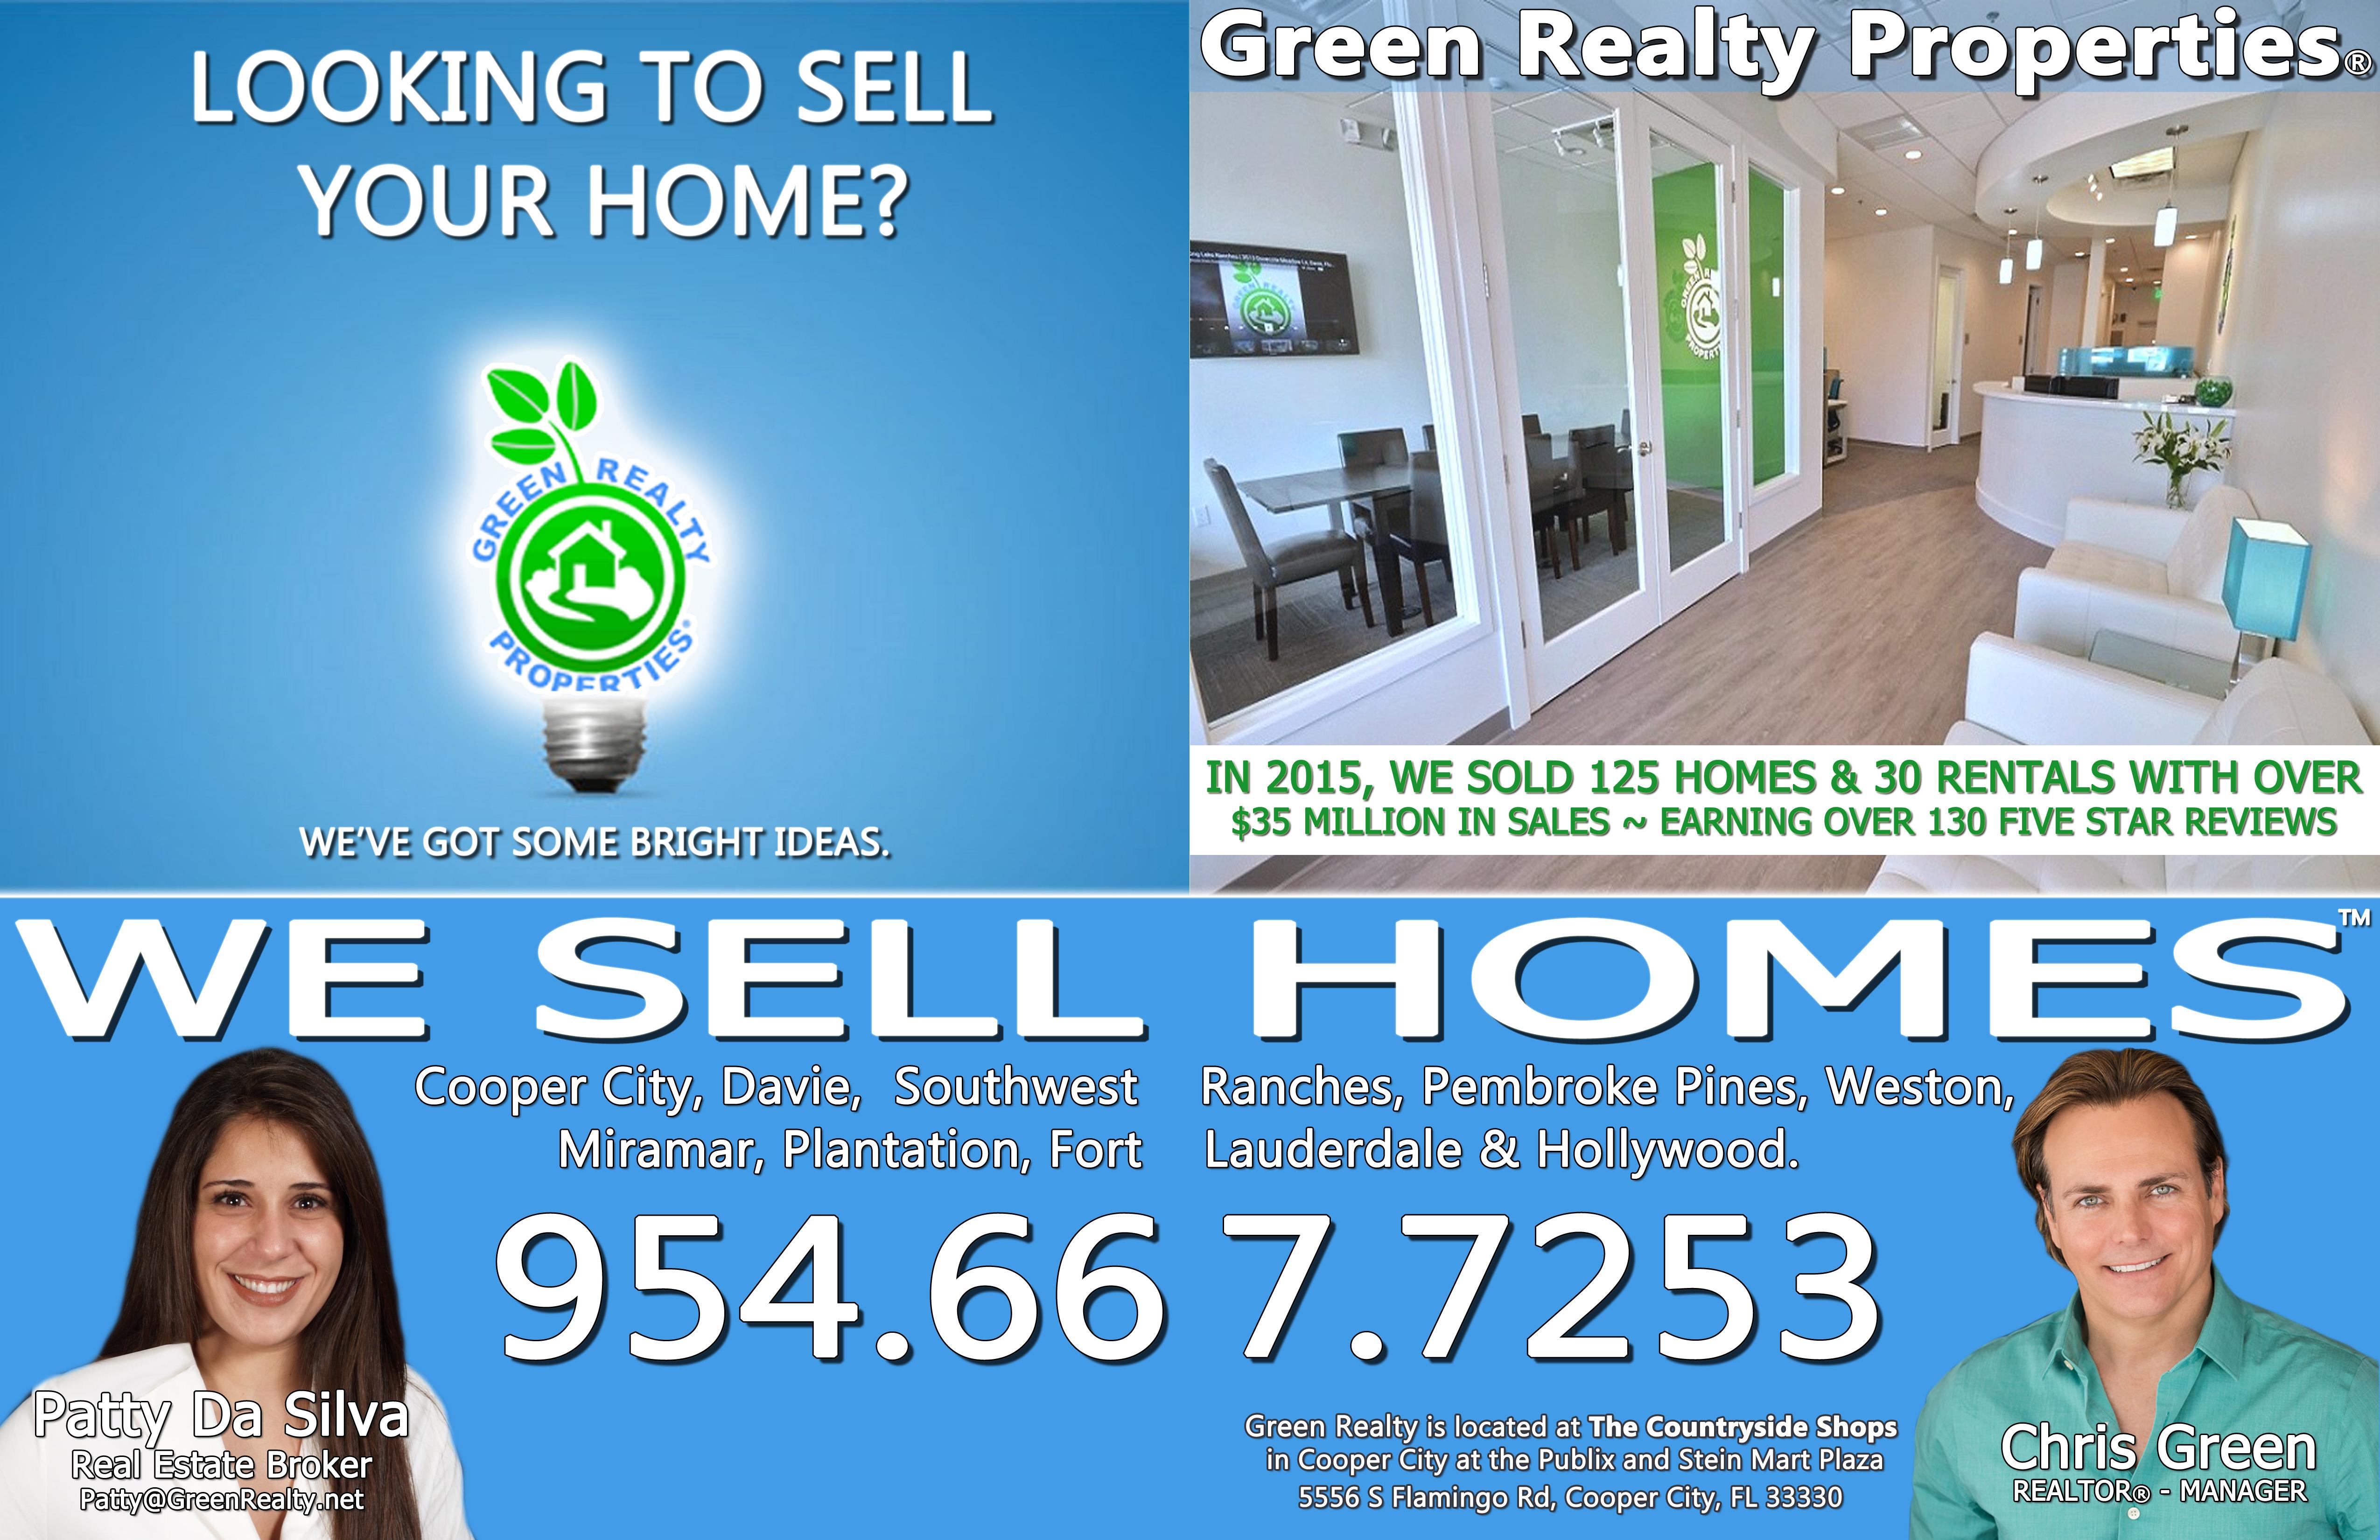 Patty SELLS Homes - Green Realty is located in The Countryside Shops at 5556 S Flamingo Rd, Cooper City FL 33330